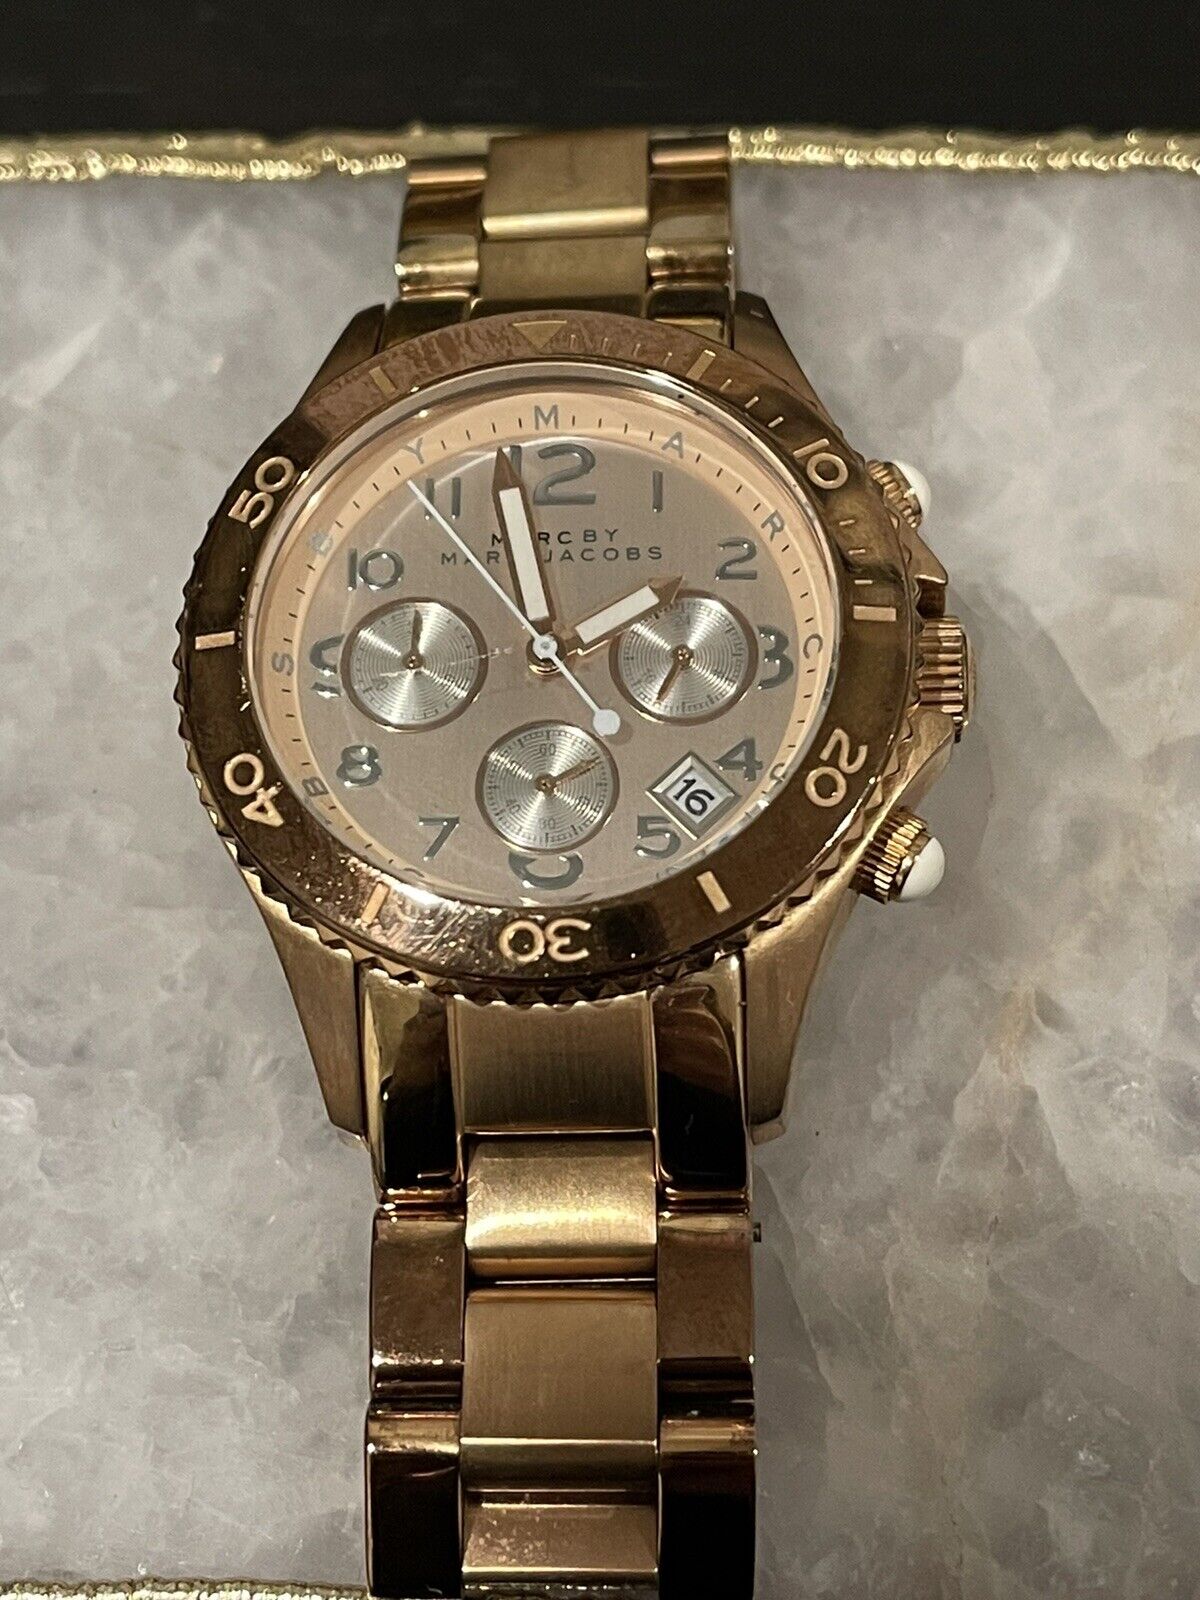 Marc by Marc Jacobs Womens Rock Chronograph Watch Rose Gold MBM3156 Excellent